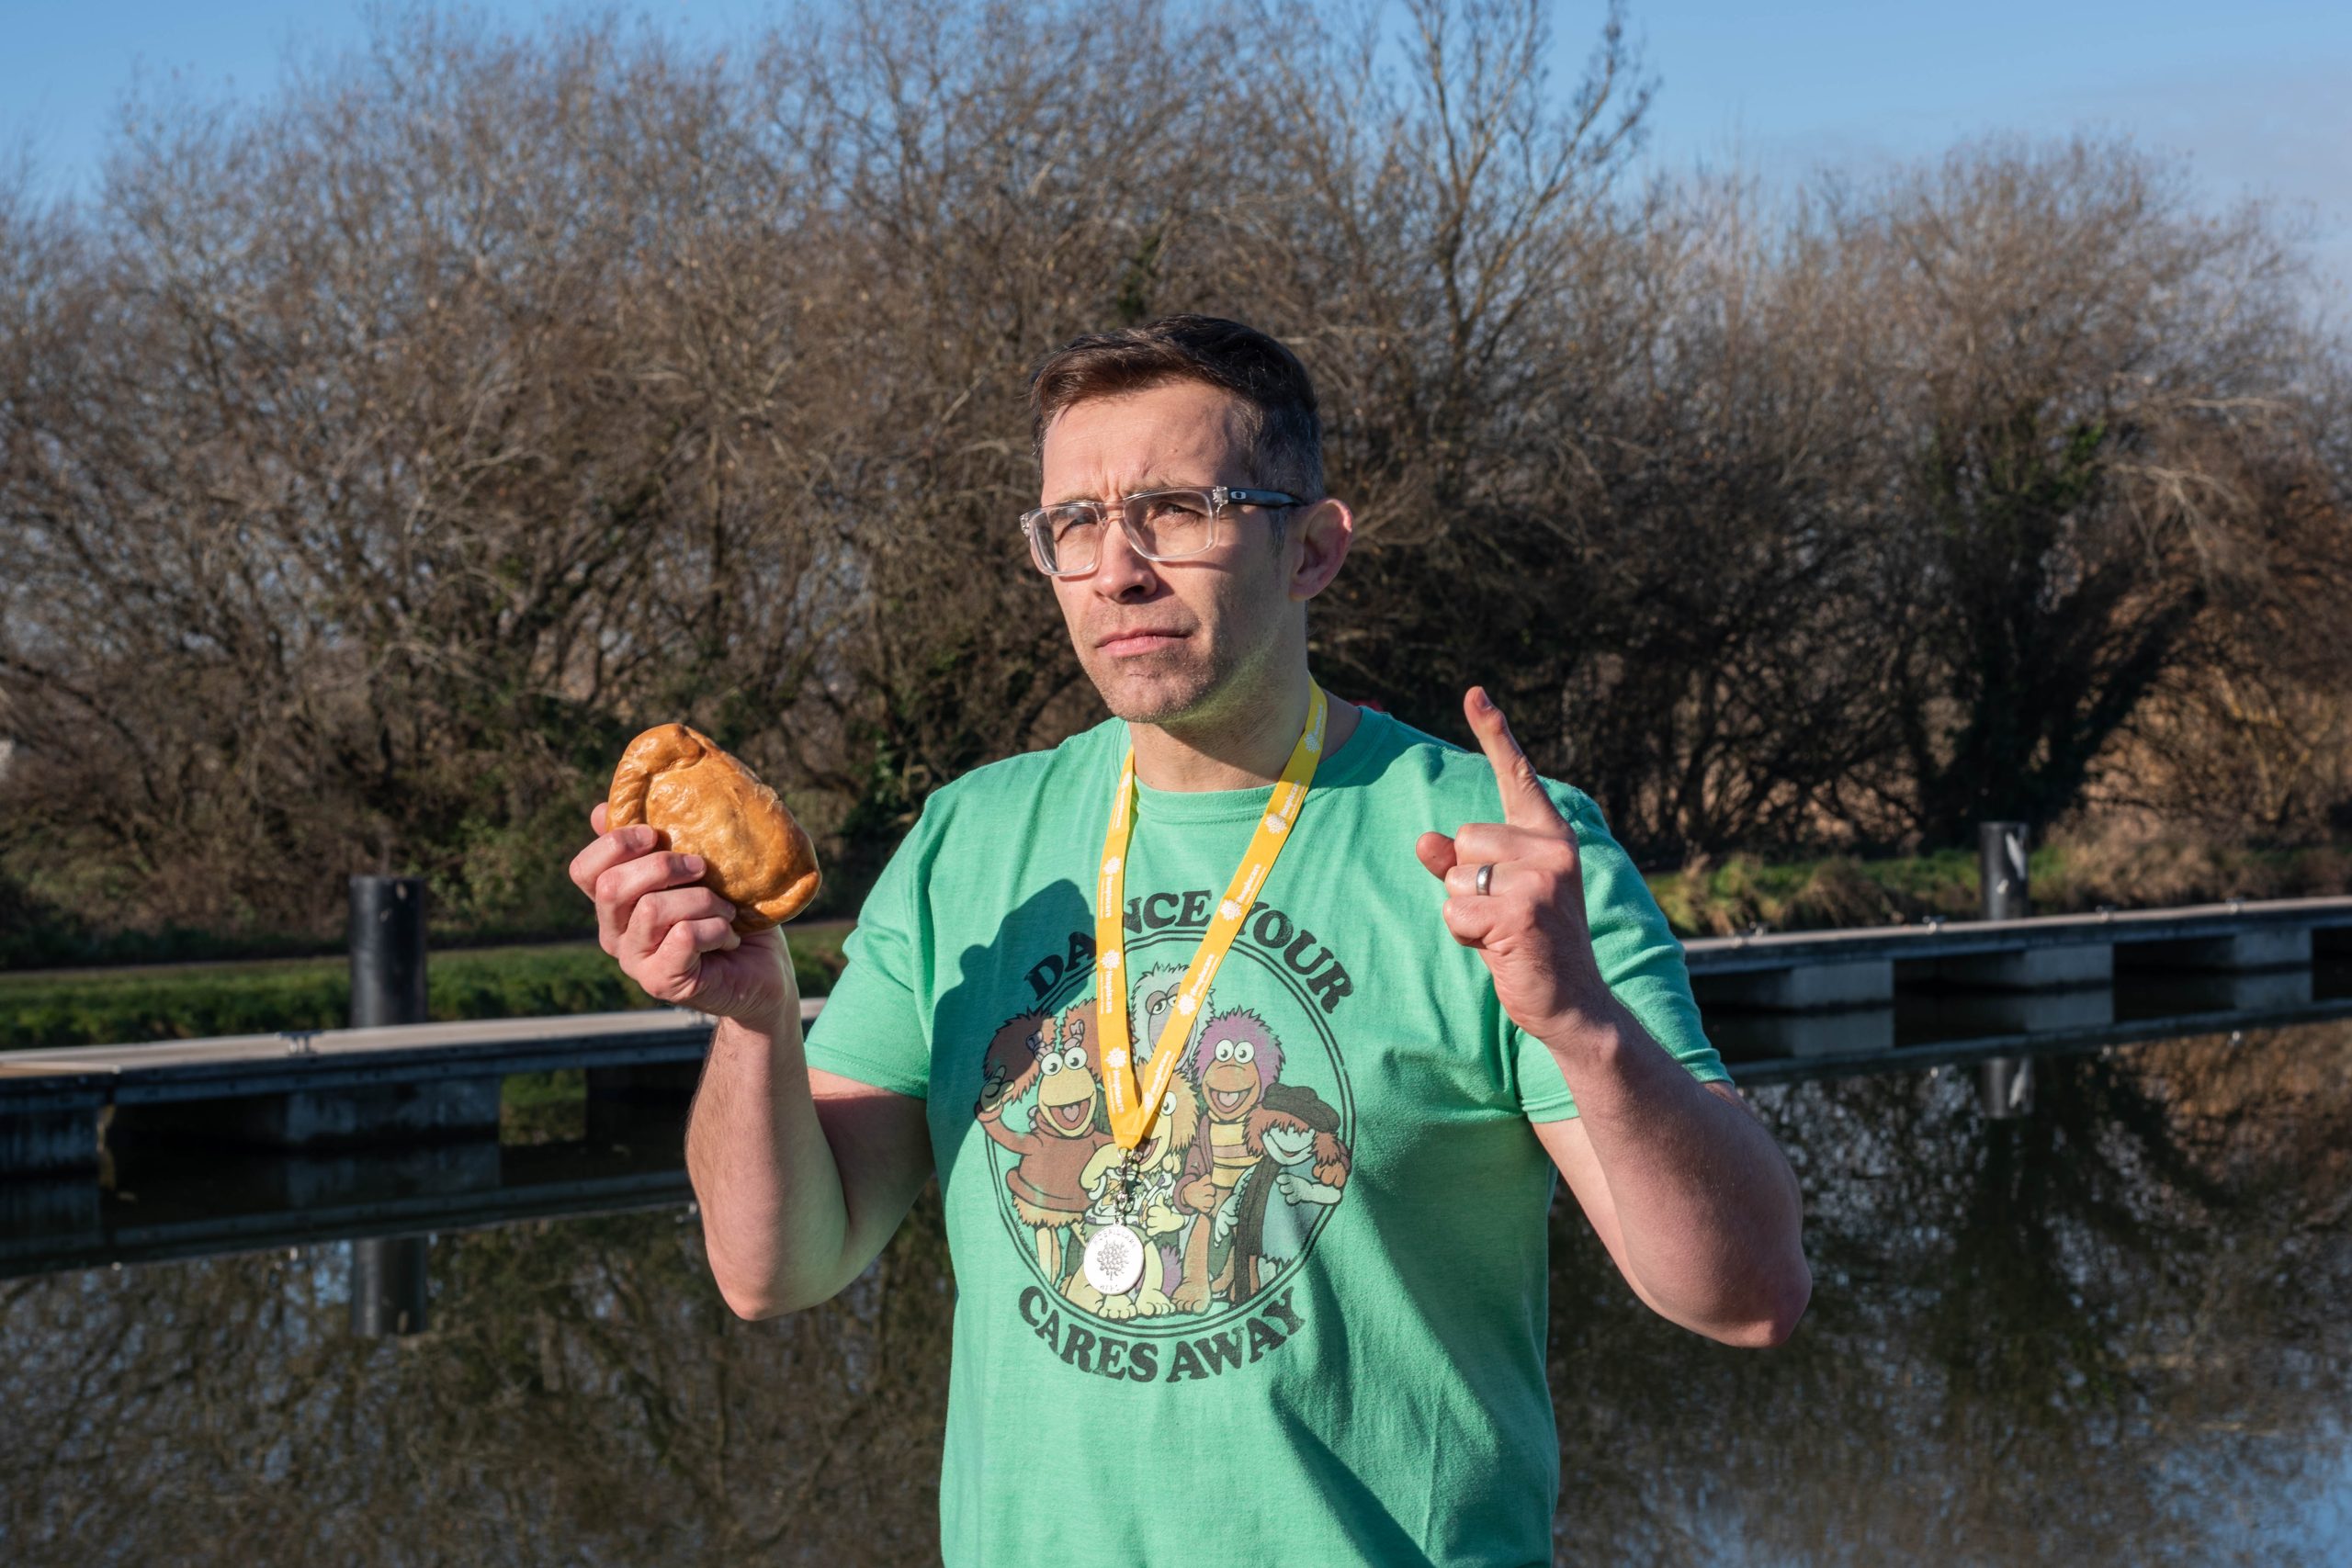 A man holding a pasty wearing a medal